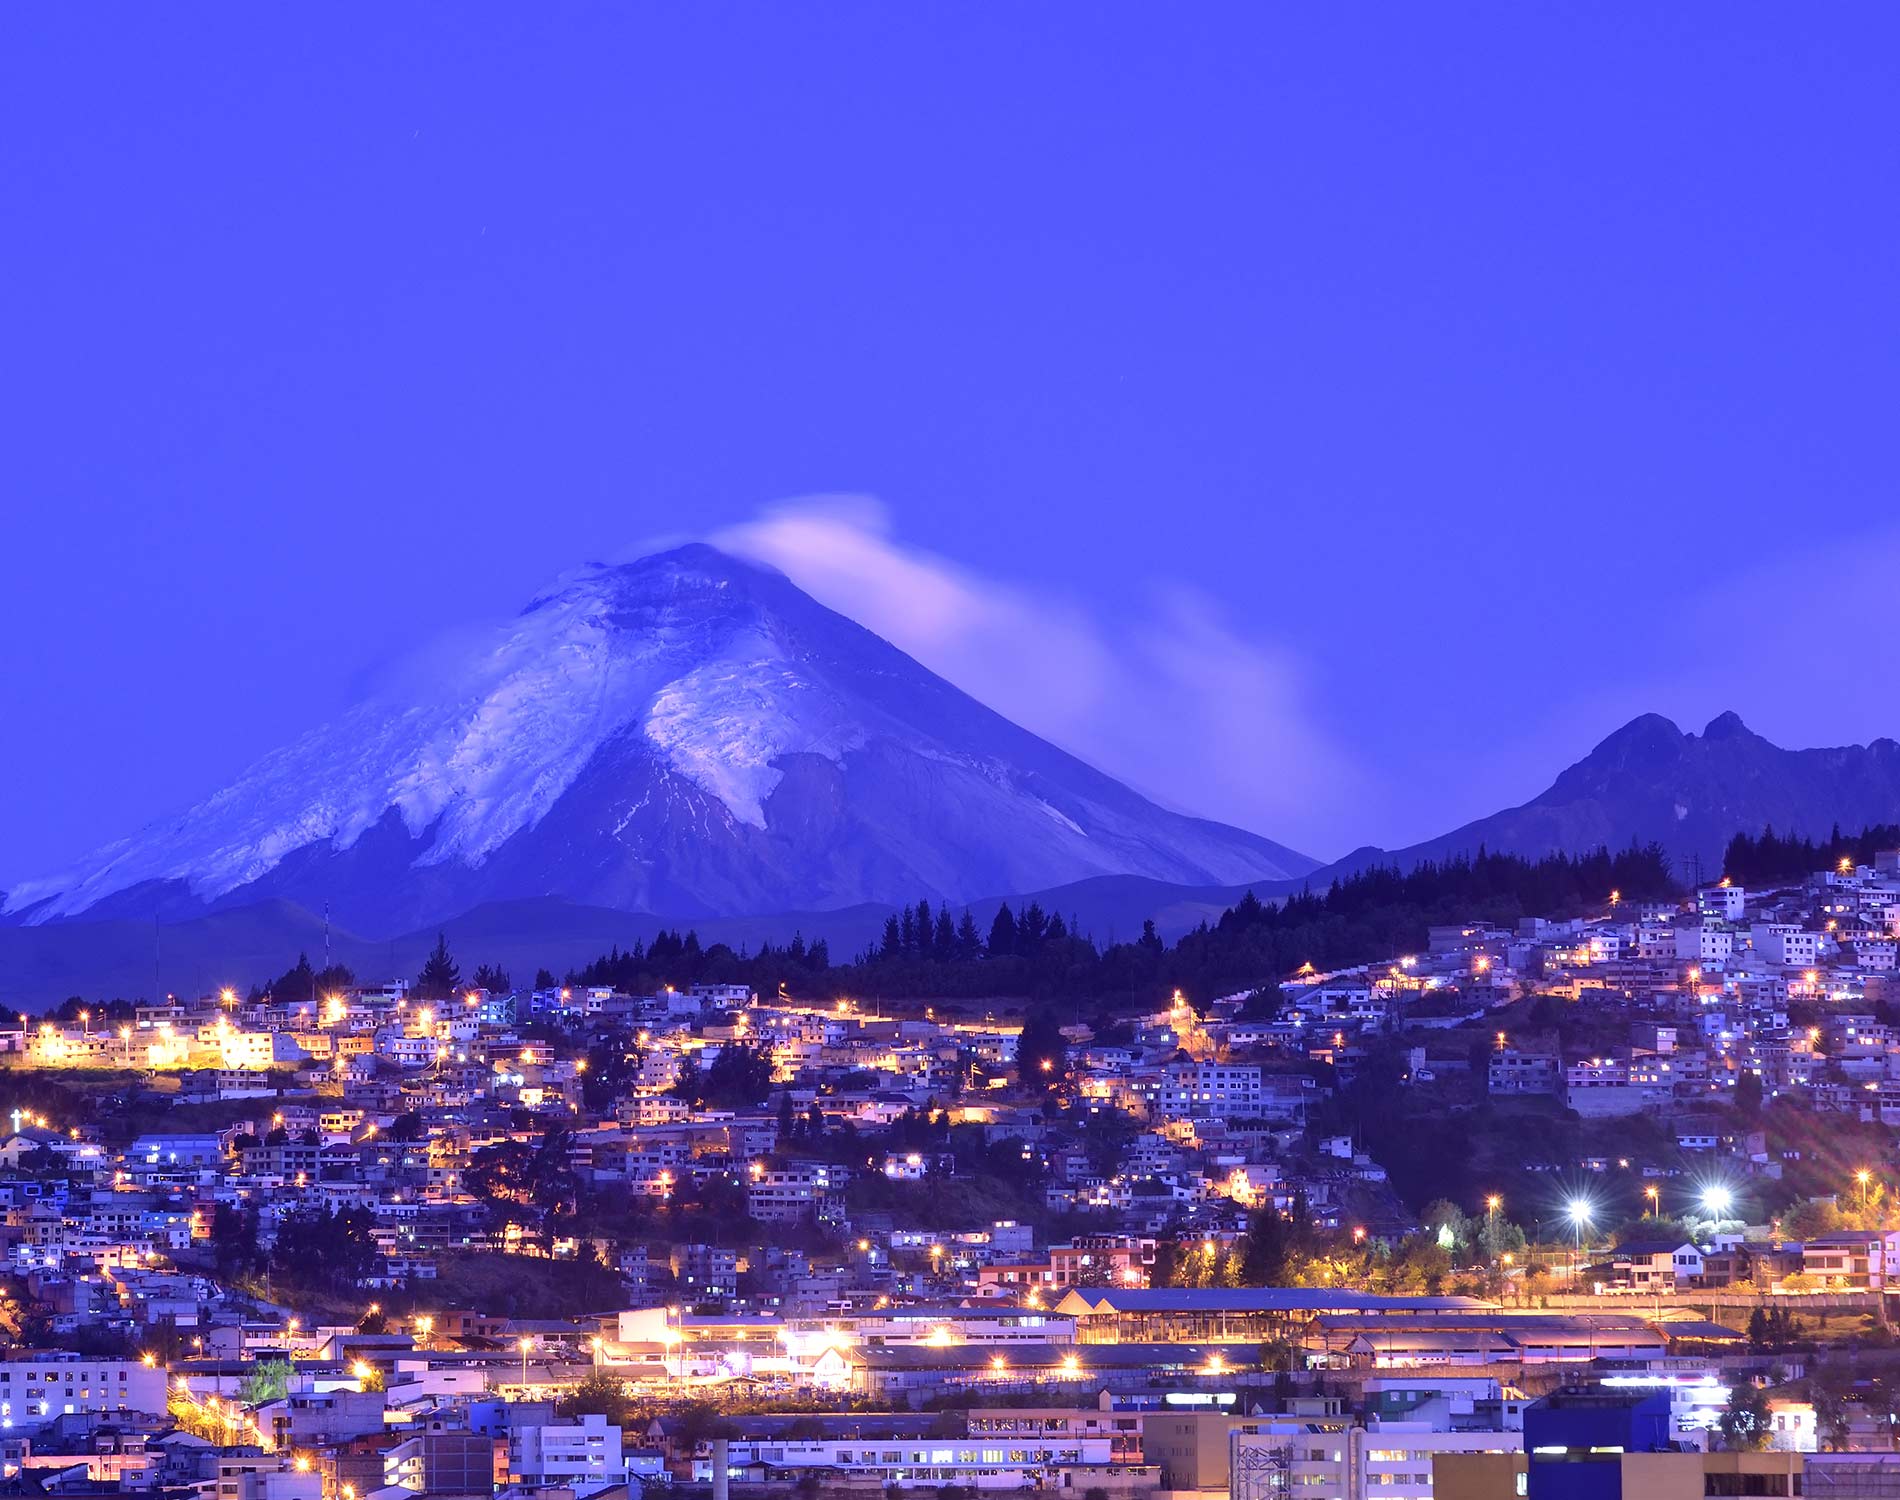 /-/media/images/website/background-images/offices/quito/quito.ashx?sc_lang=zh-cn